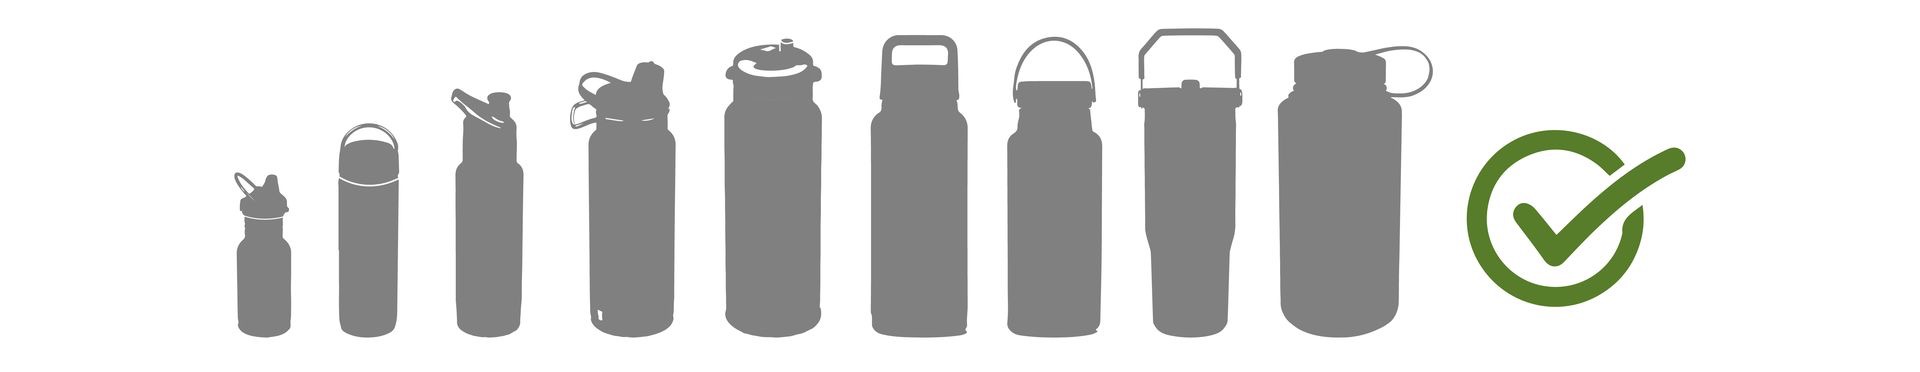 Different size bottles from different companies that Adjustable bottle sling fits into 